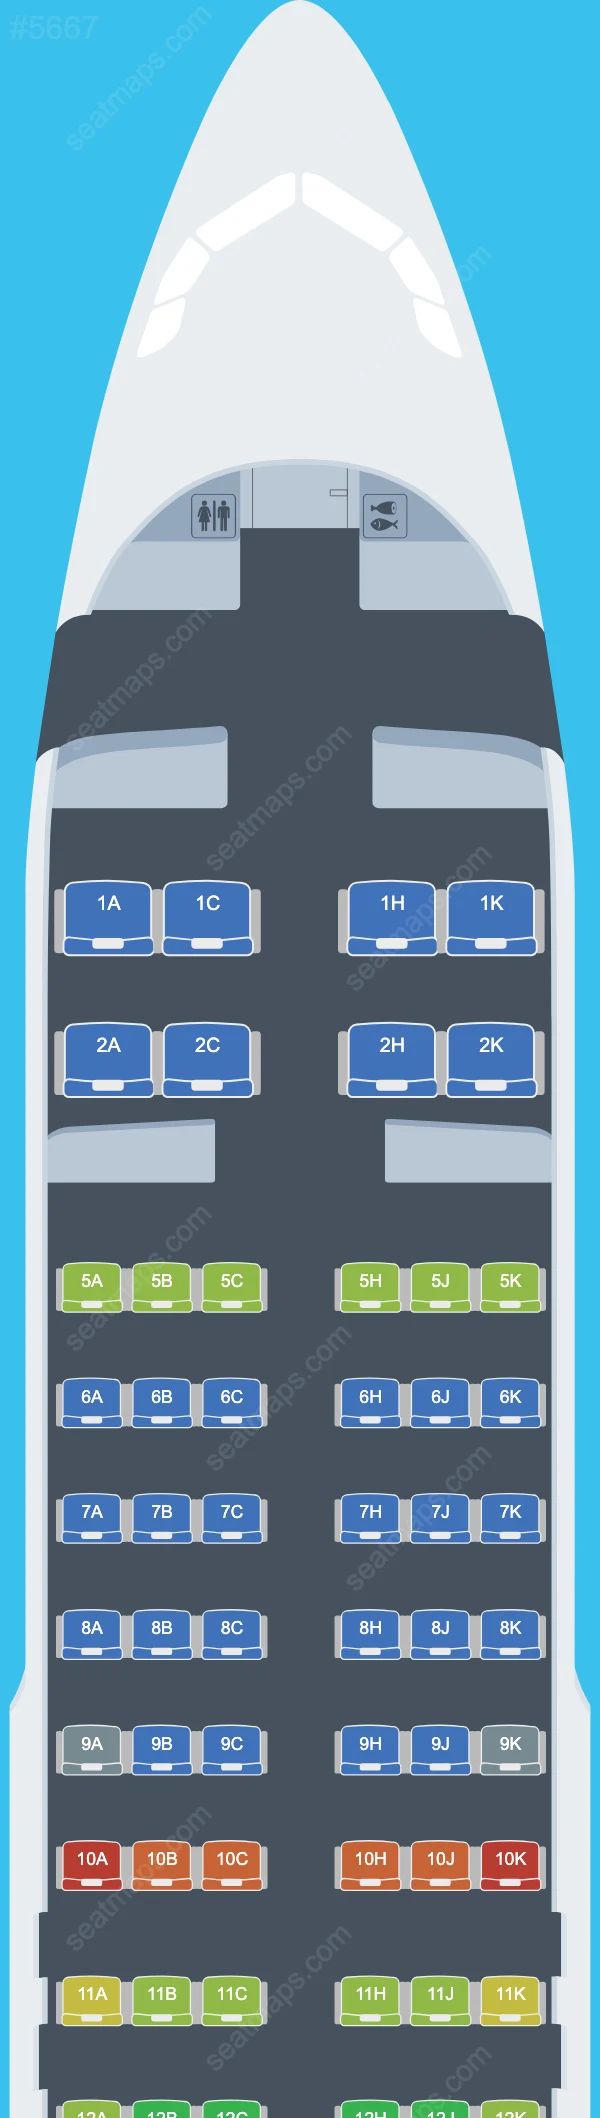 ANA (All Nippon Airways) Airbus A320-200neo seatmap mobile preview